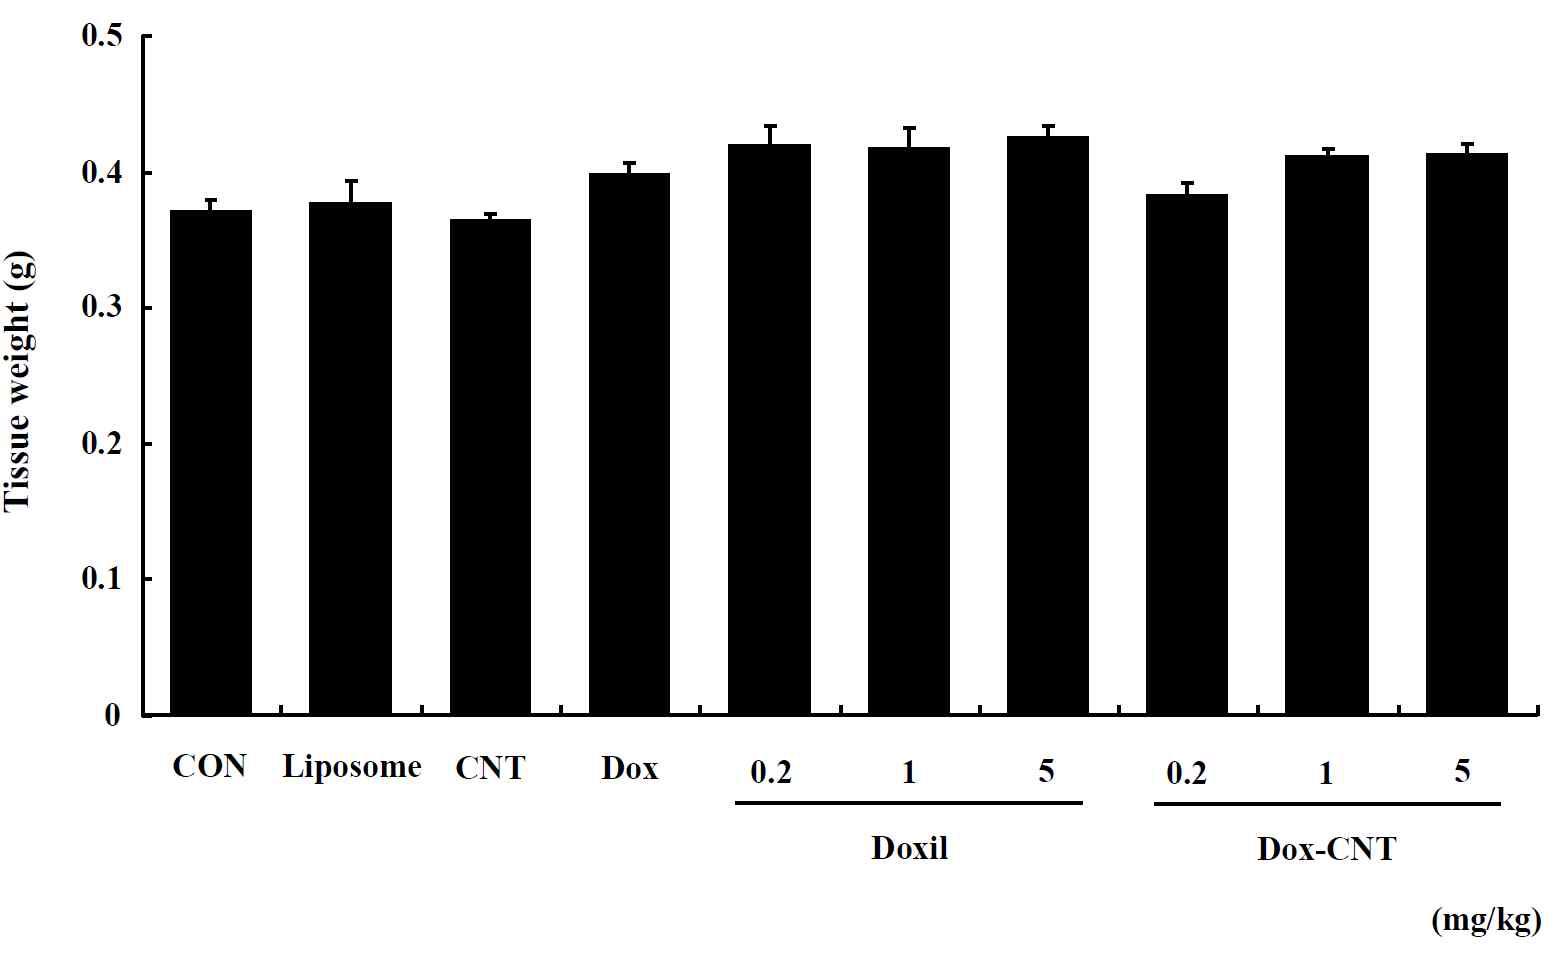 The change of brain weight in single exposed male ICR mice for 14 days. Mice were respectively administered by intravenous injection with liposome, CNT, Dox, Doxil (0.2, 1, 5 mg/kg) and Dox-CNT (0.2, 1, 5 mg/kg). The results are presented as mean ± SE (n = 10). * p < 0.05, significantly different from the control.